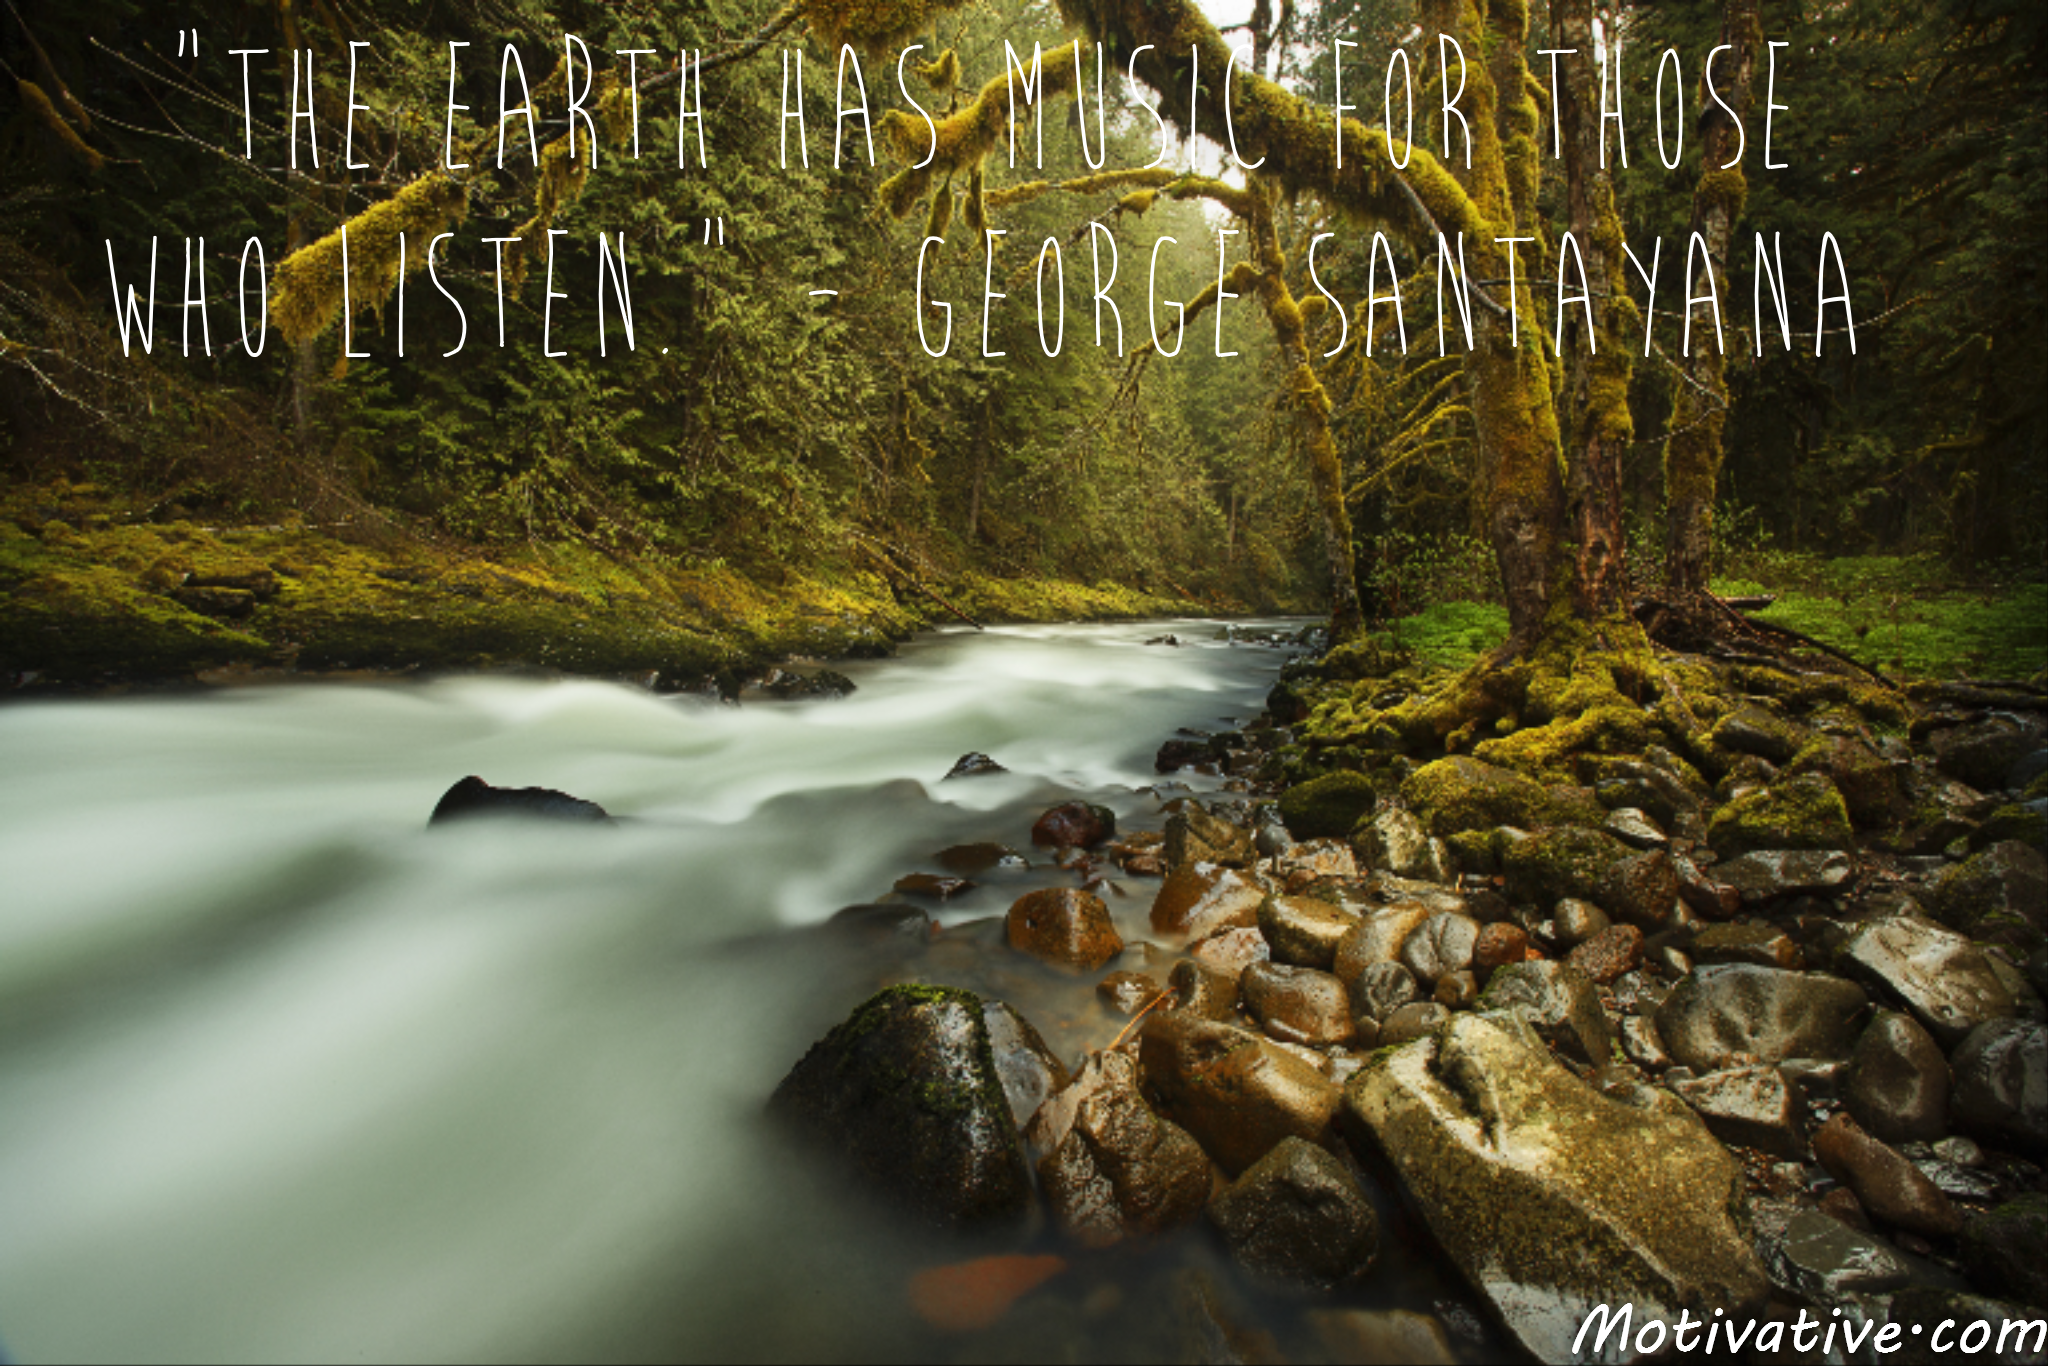 The earth has music for those who listen – George Santayana